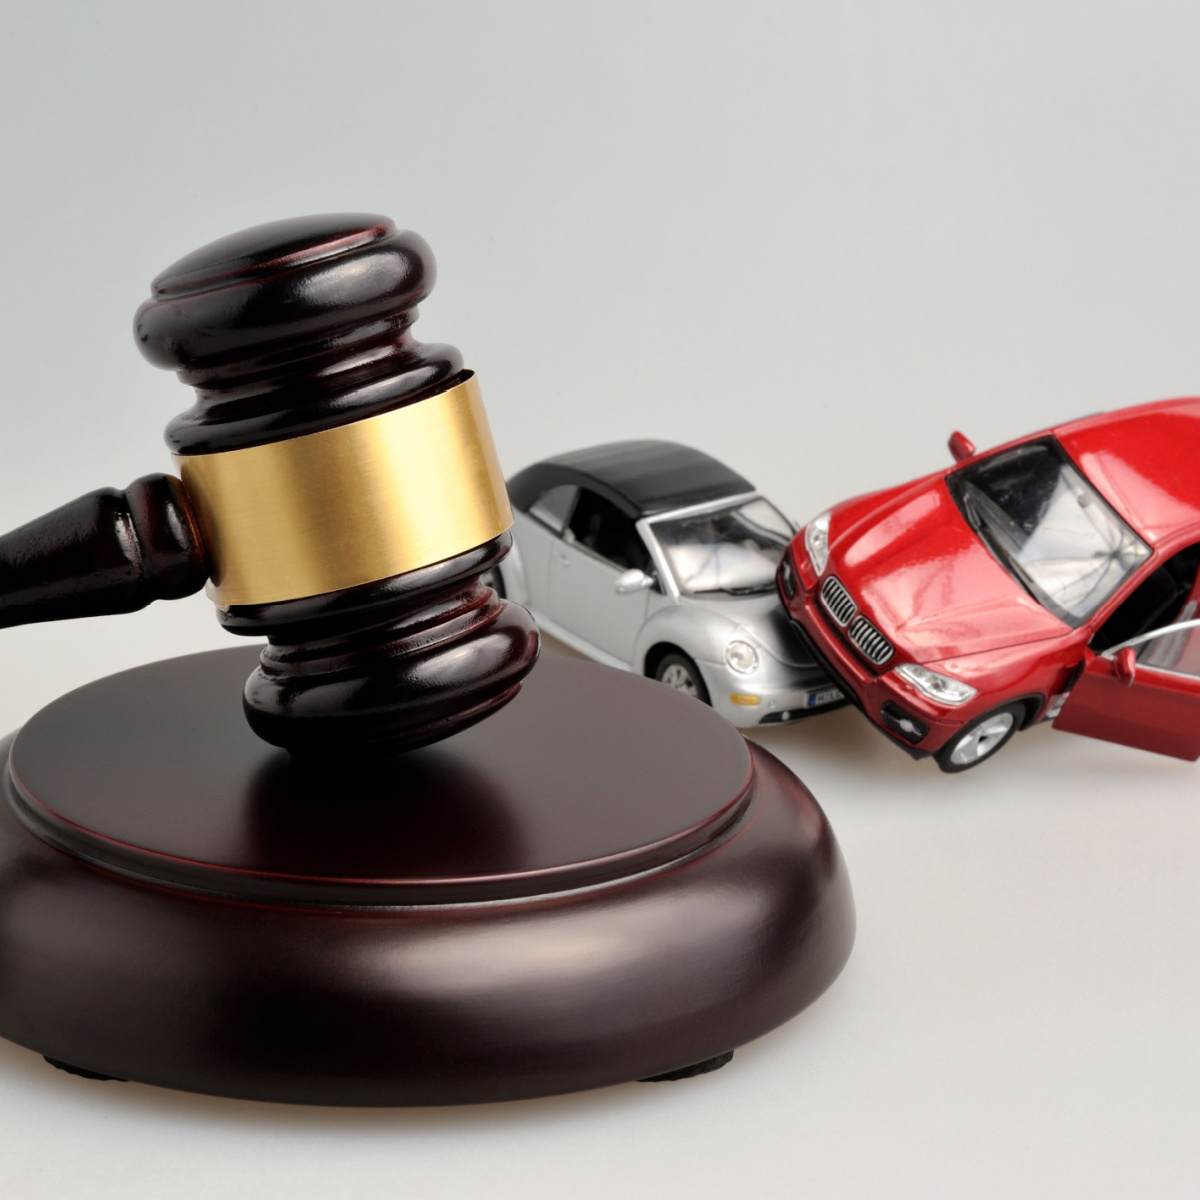 Understanding Your Rights After a Vehicle Crash - Tips from a Houston Car Accident Lawyer